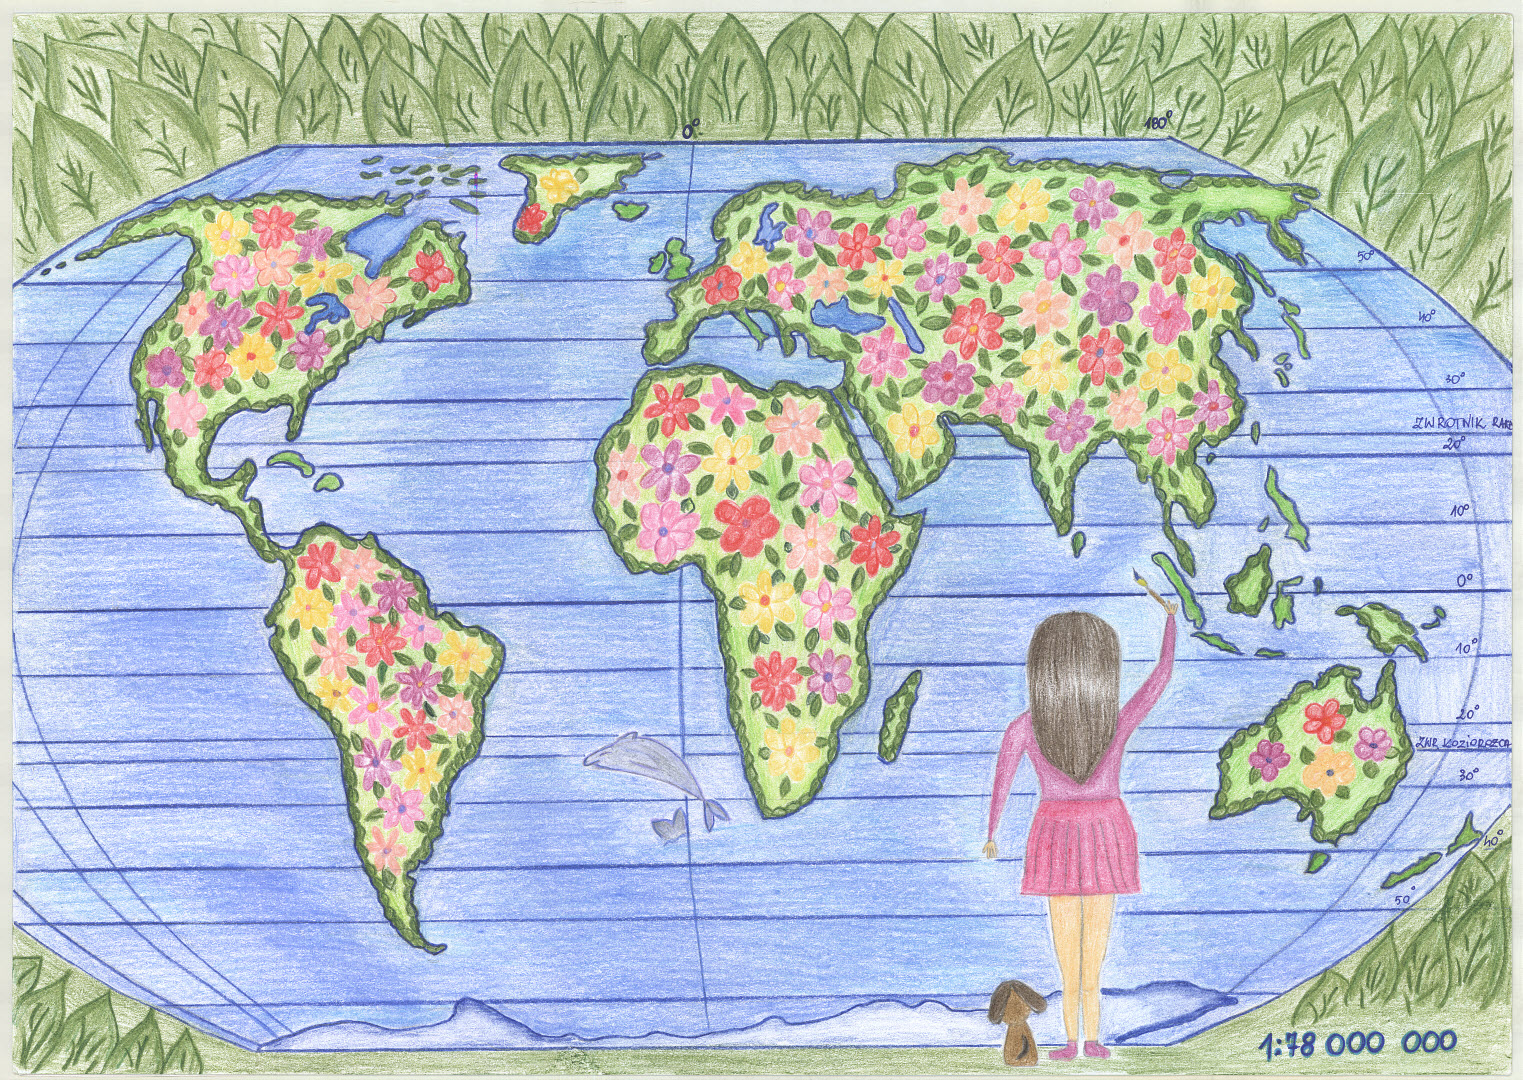 Shows a person and their dog with each continent and flowers within each location